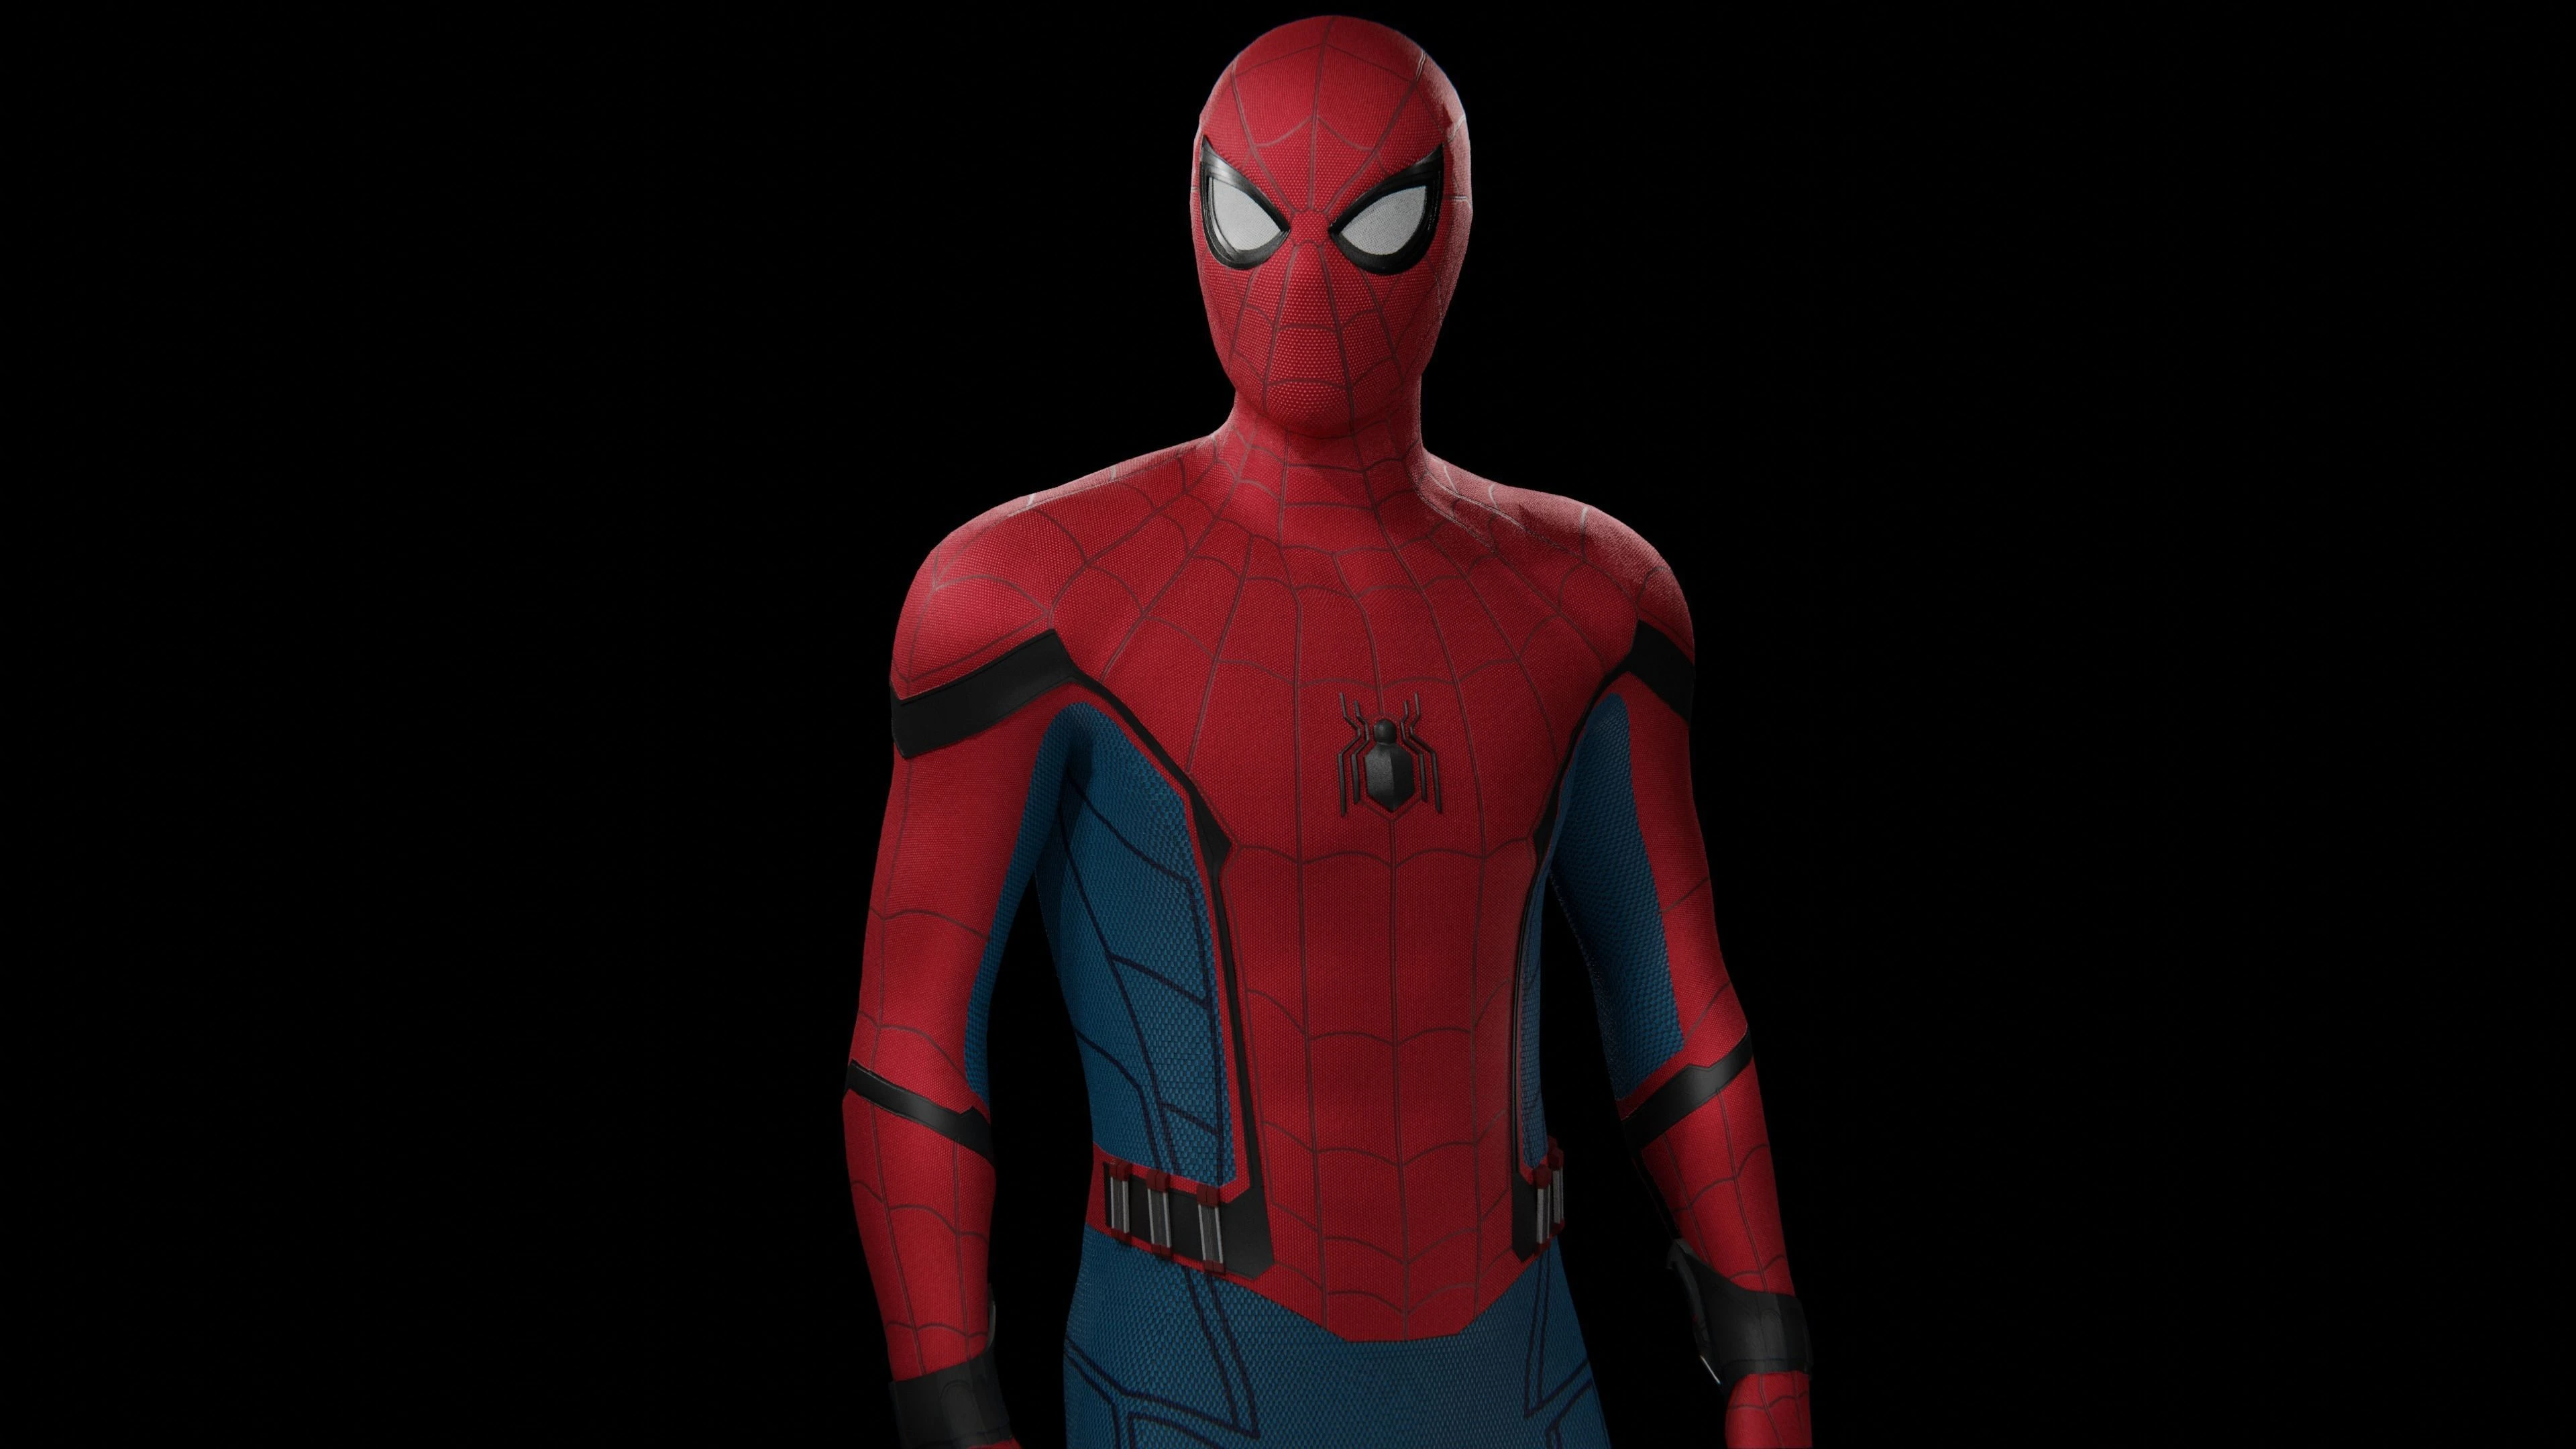 Hot Toys Goes Homemade With First Spider-Man: Homecoming Figure